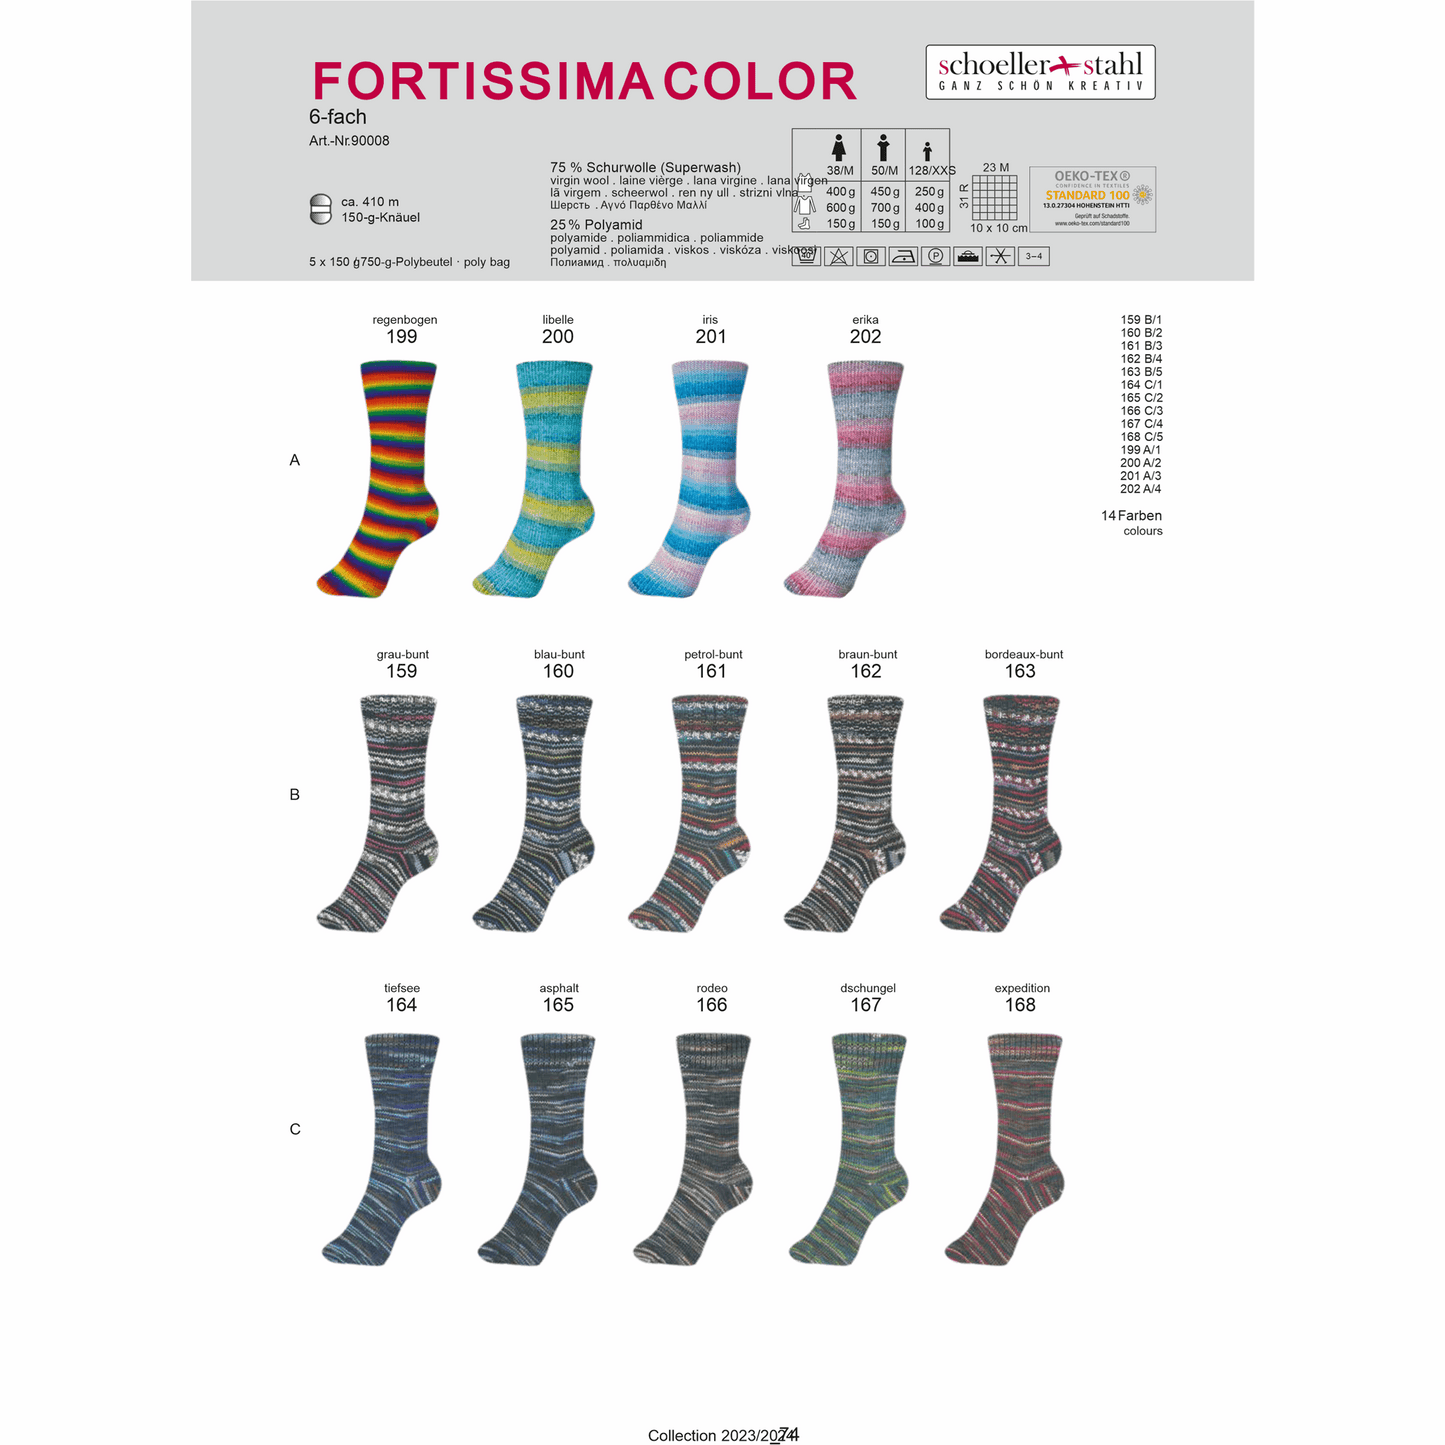 Fortissima 6-thread 150g color, 90008, color 168, expedition